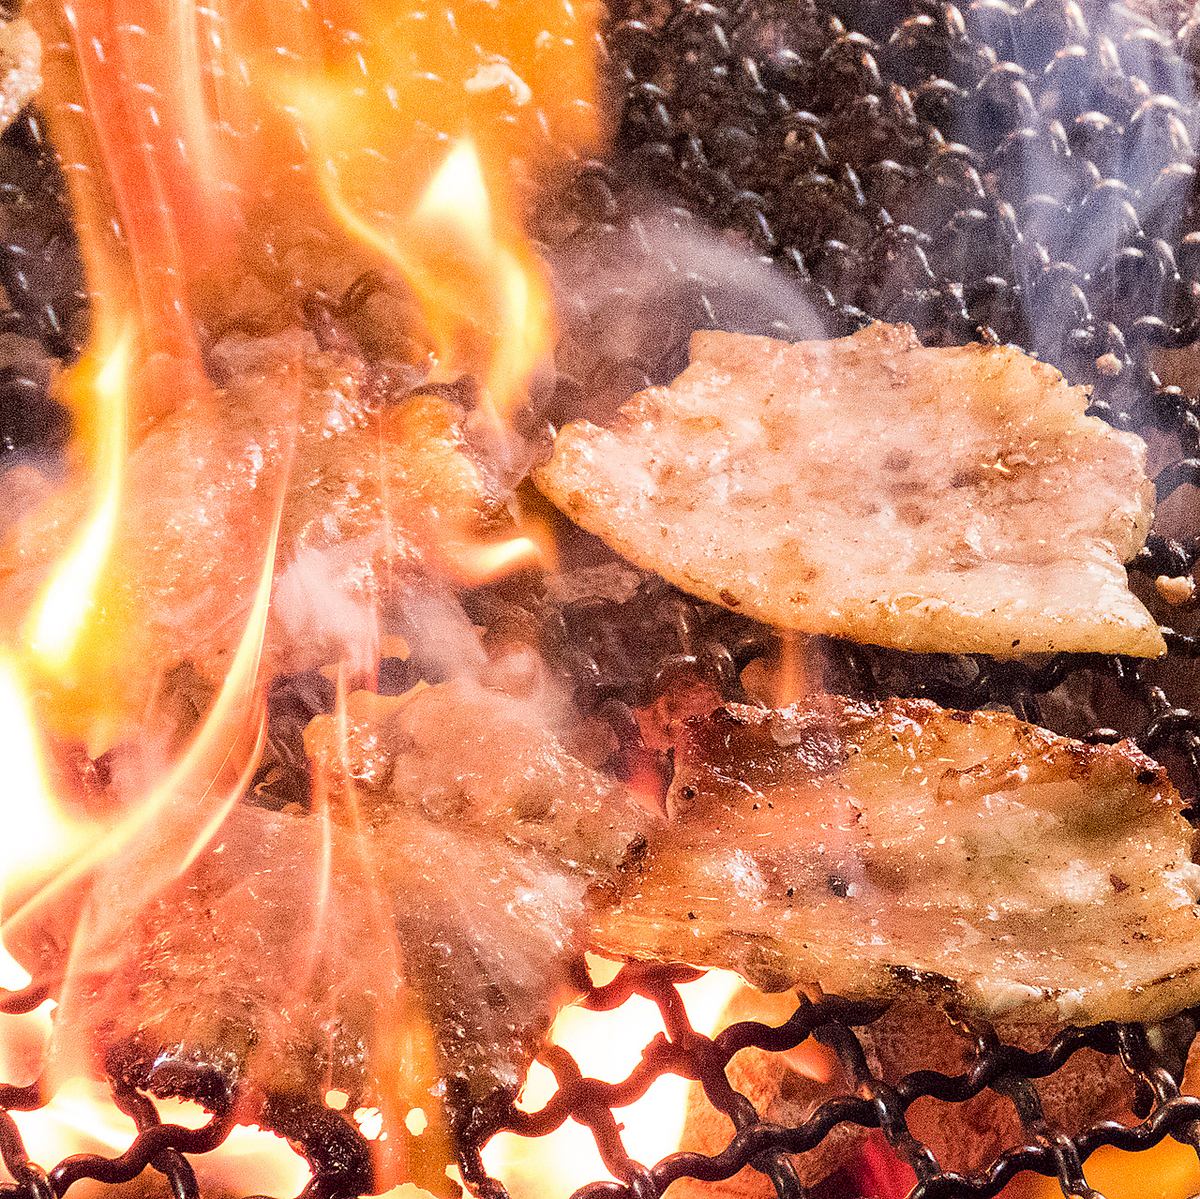 Enjoy authentic charcoal-grilled yakiniku! All-you-can-eat courses start at 2,000 yen, with no time limit!